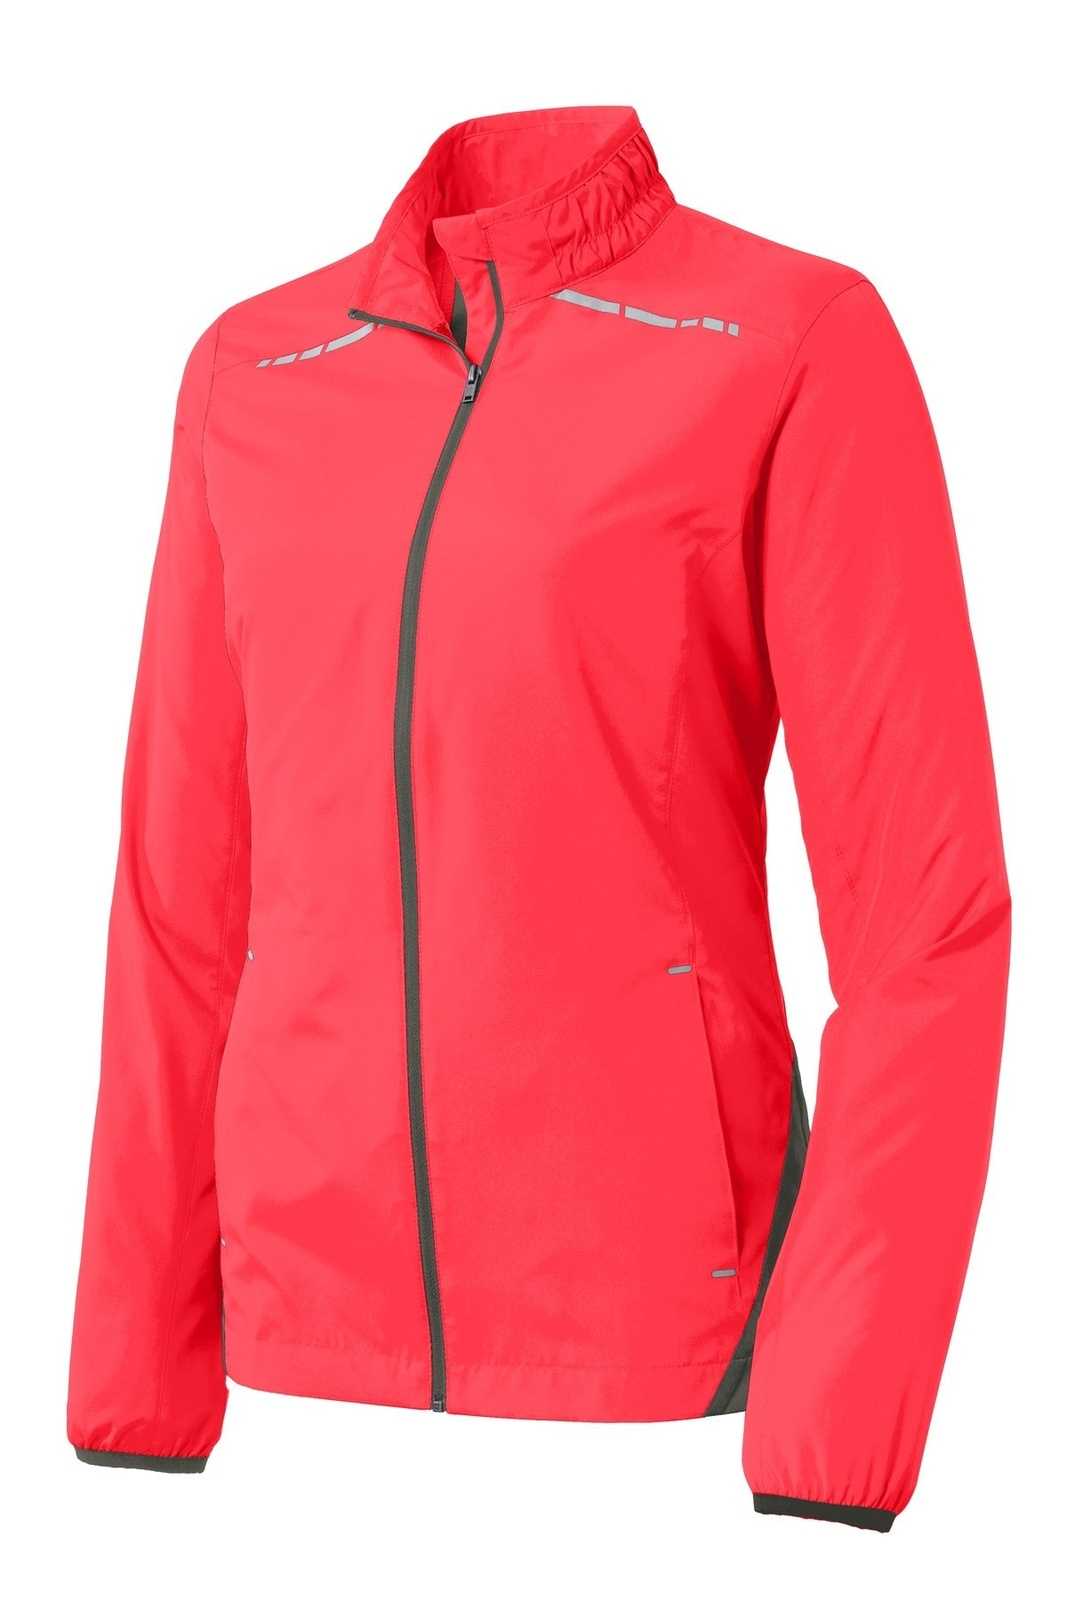 Port Authority L345 Ladies Zephyr Reflective Hit Full-Zip Jacket - Hot Coral Gray Steel - HIT a Double - 5